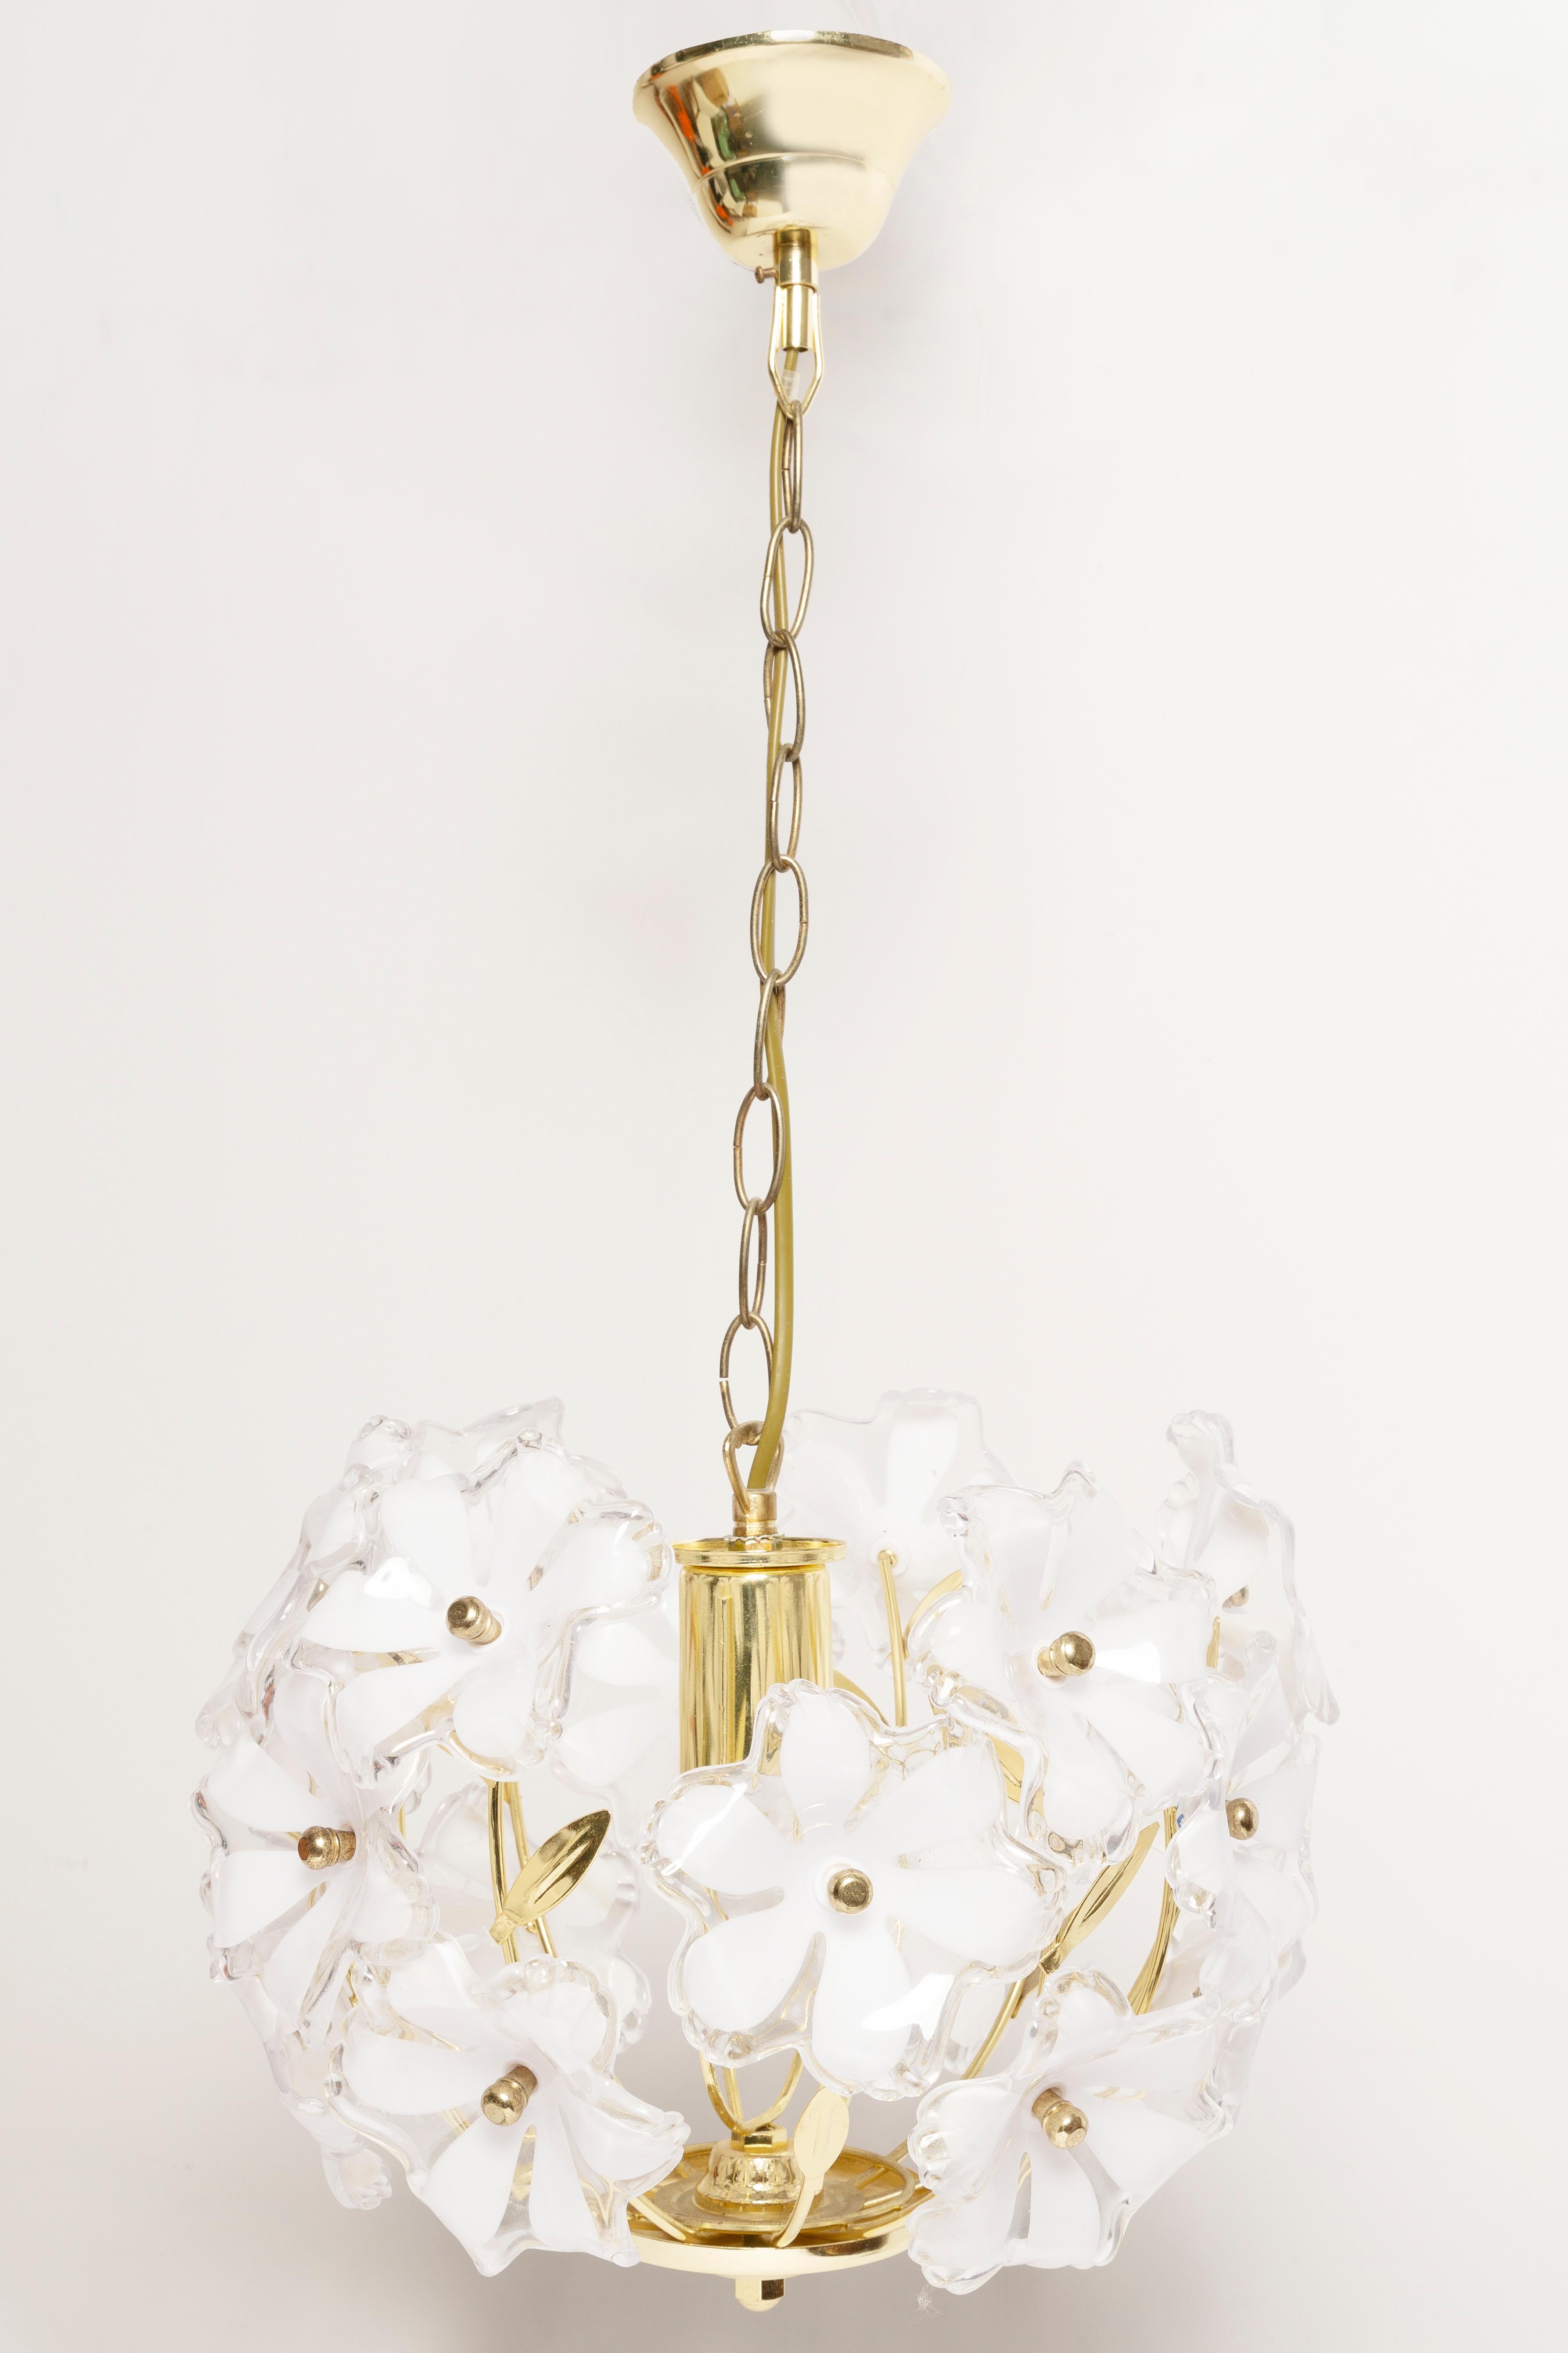 Beautiful ceiling lamp in the style of the Hollywood Regency from the 1960s. Manually made by the Italian workshop. 1 standard bulb inside. Chandelier is in original very good vintage condition, plastic flowers too.

Measure: Total height is